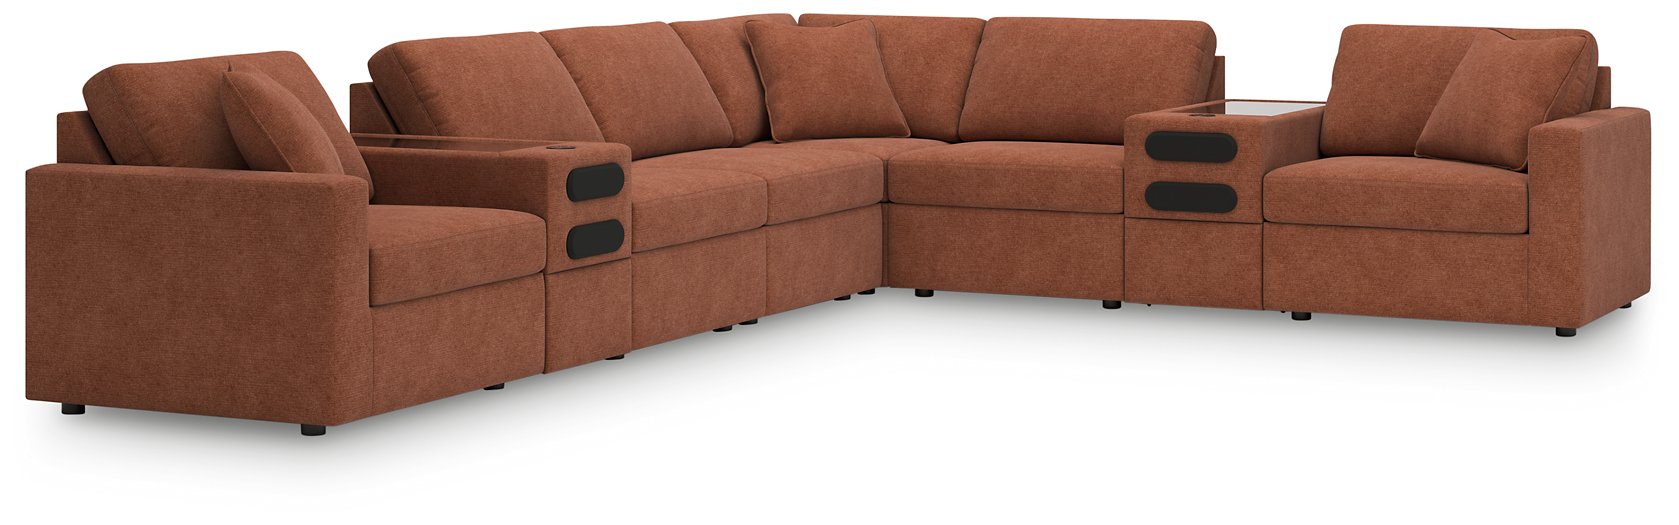 Modmax Sectional - Massey's Furniture Barn (Watertown, NY) 